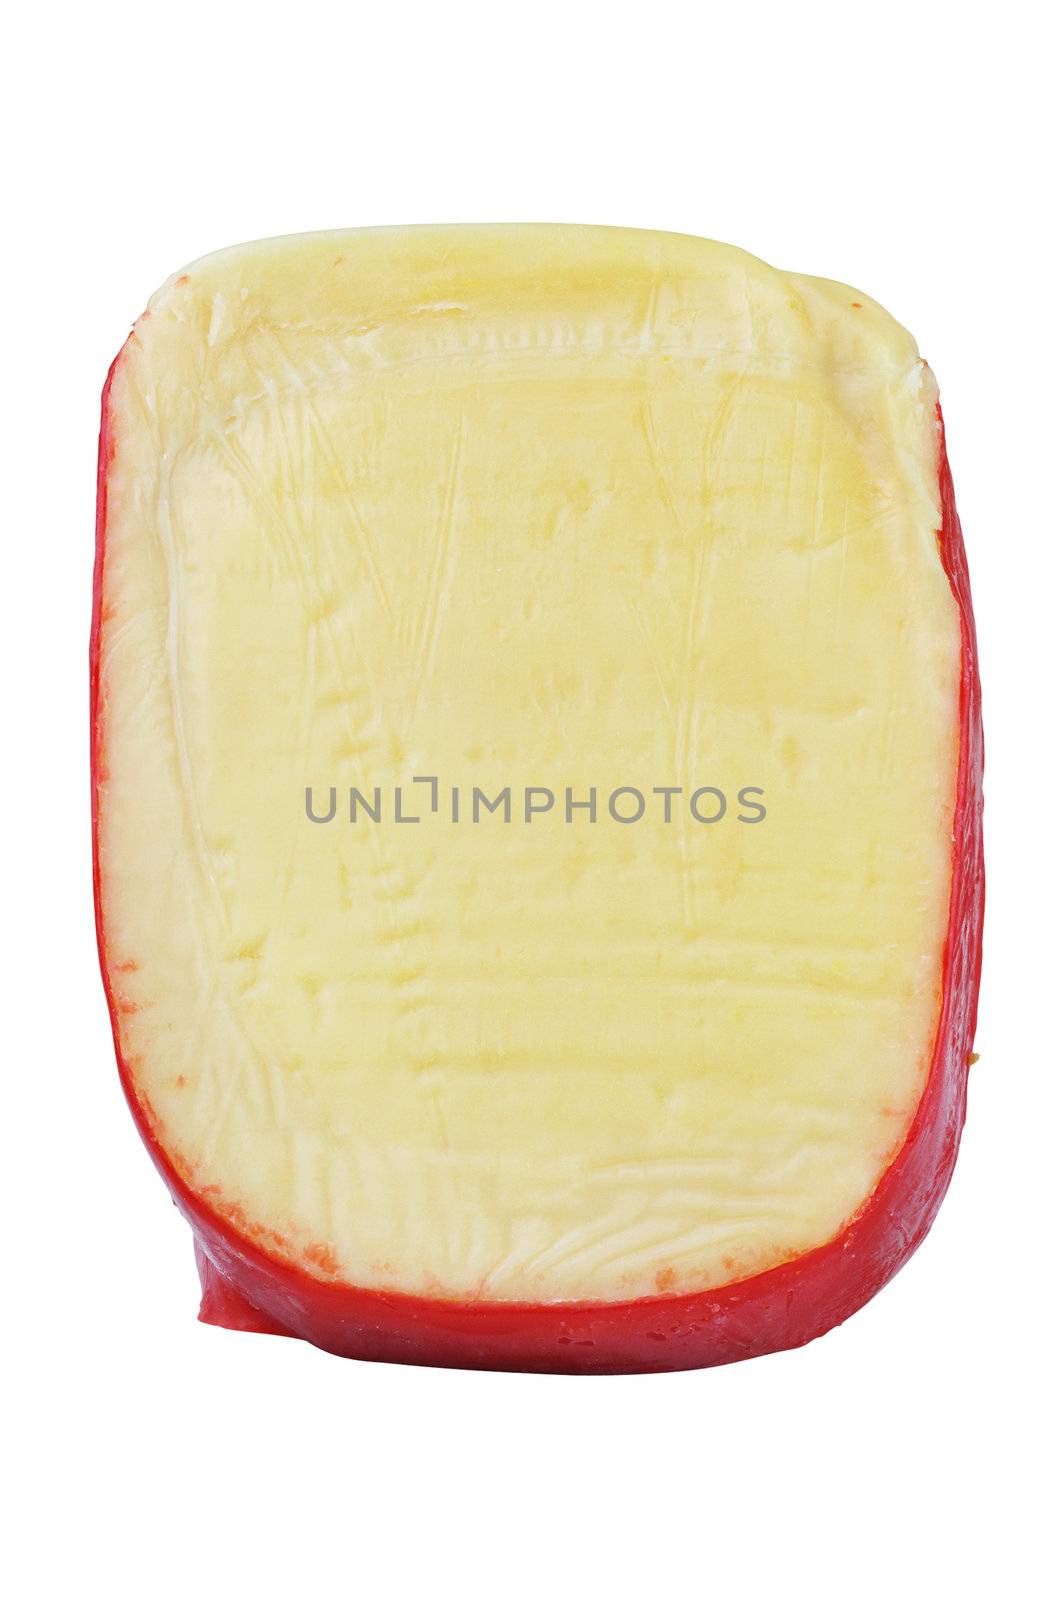 Dutch Edam cheese isolated on white background with clipping path.